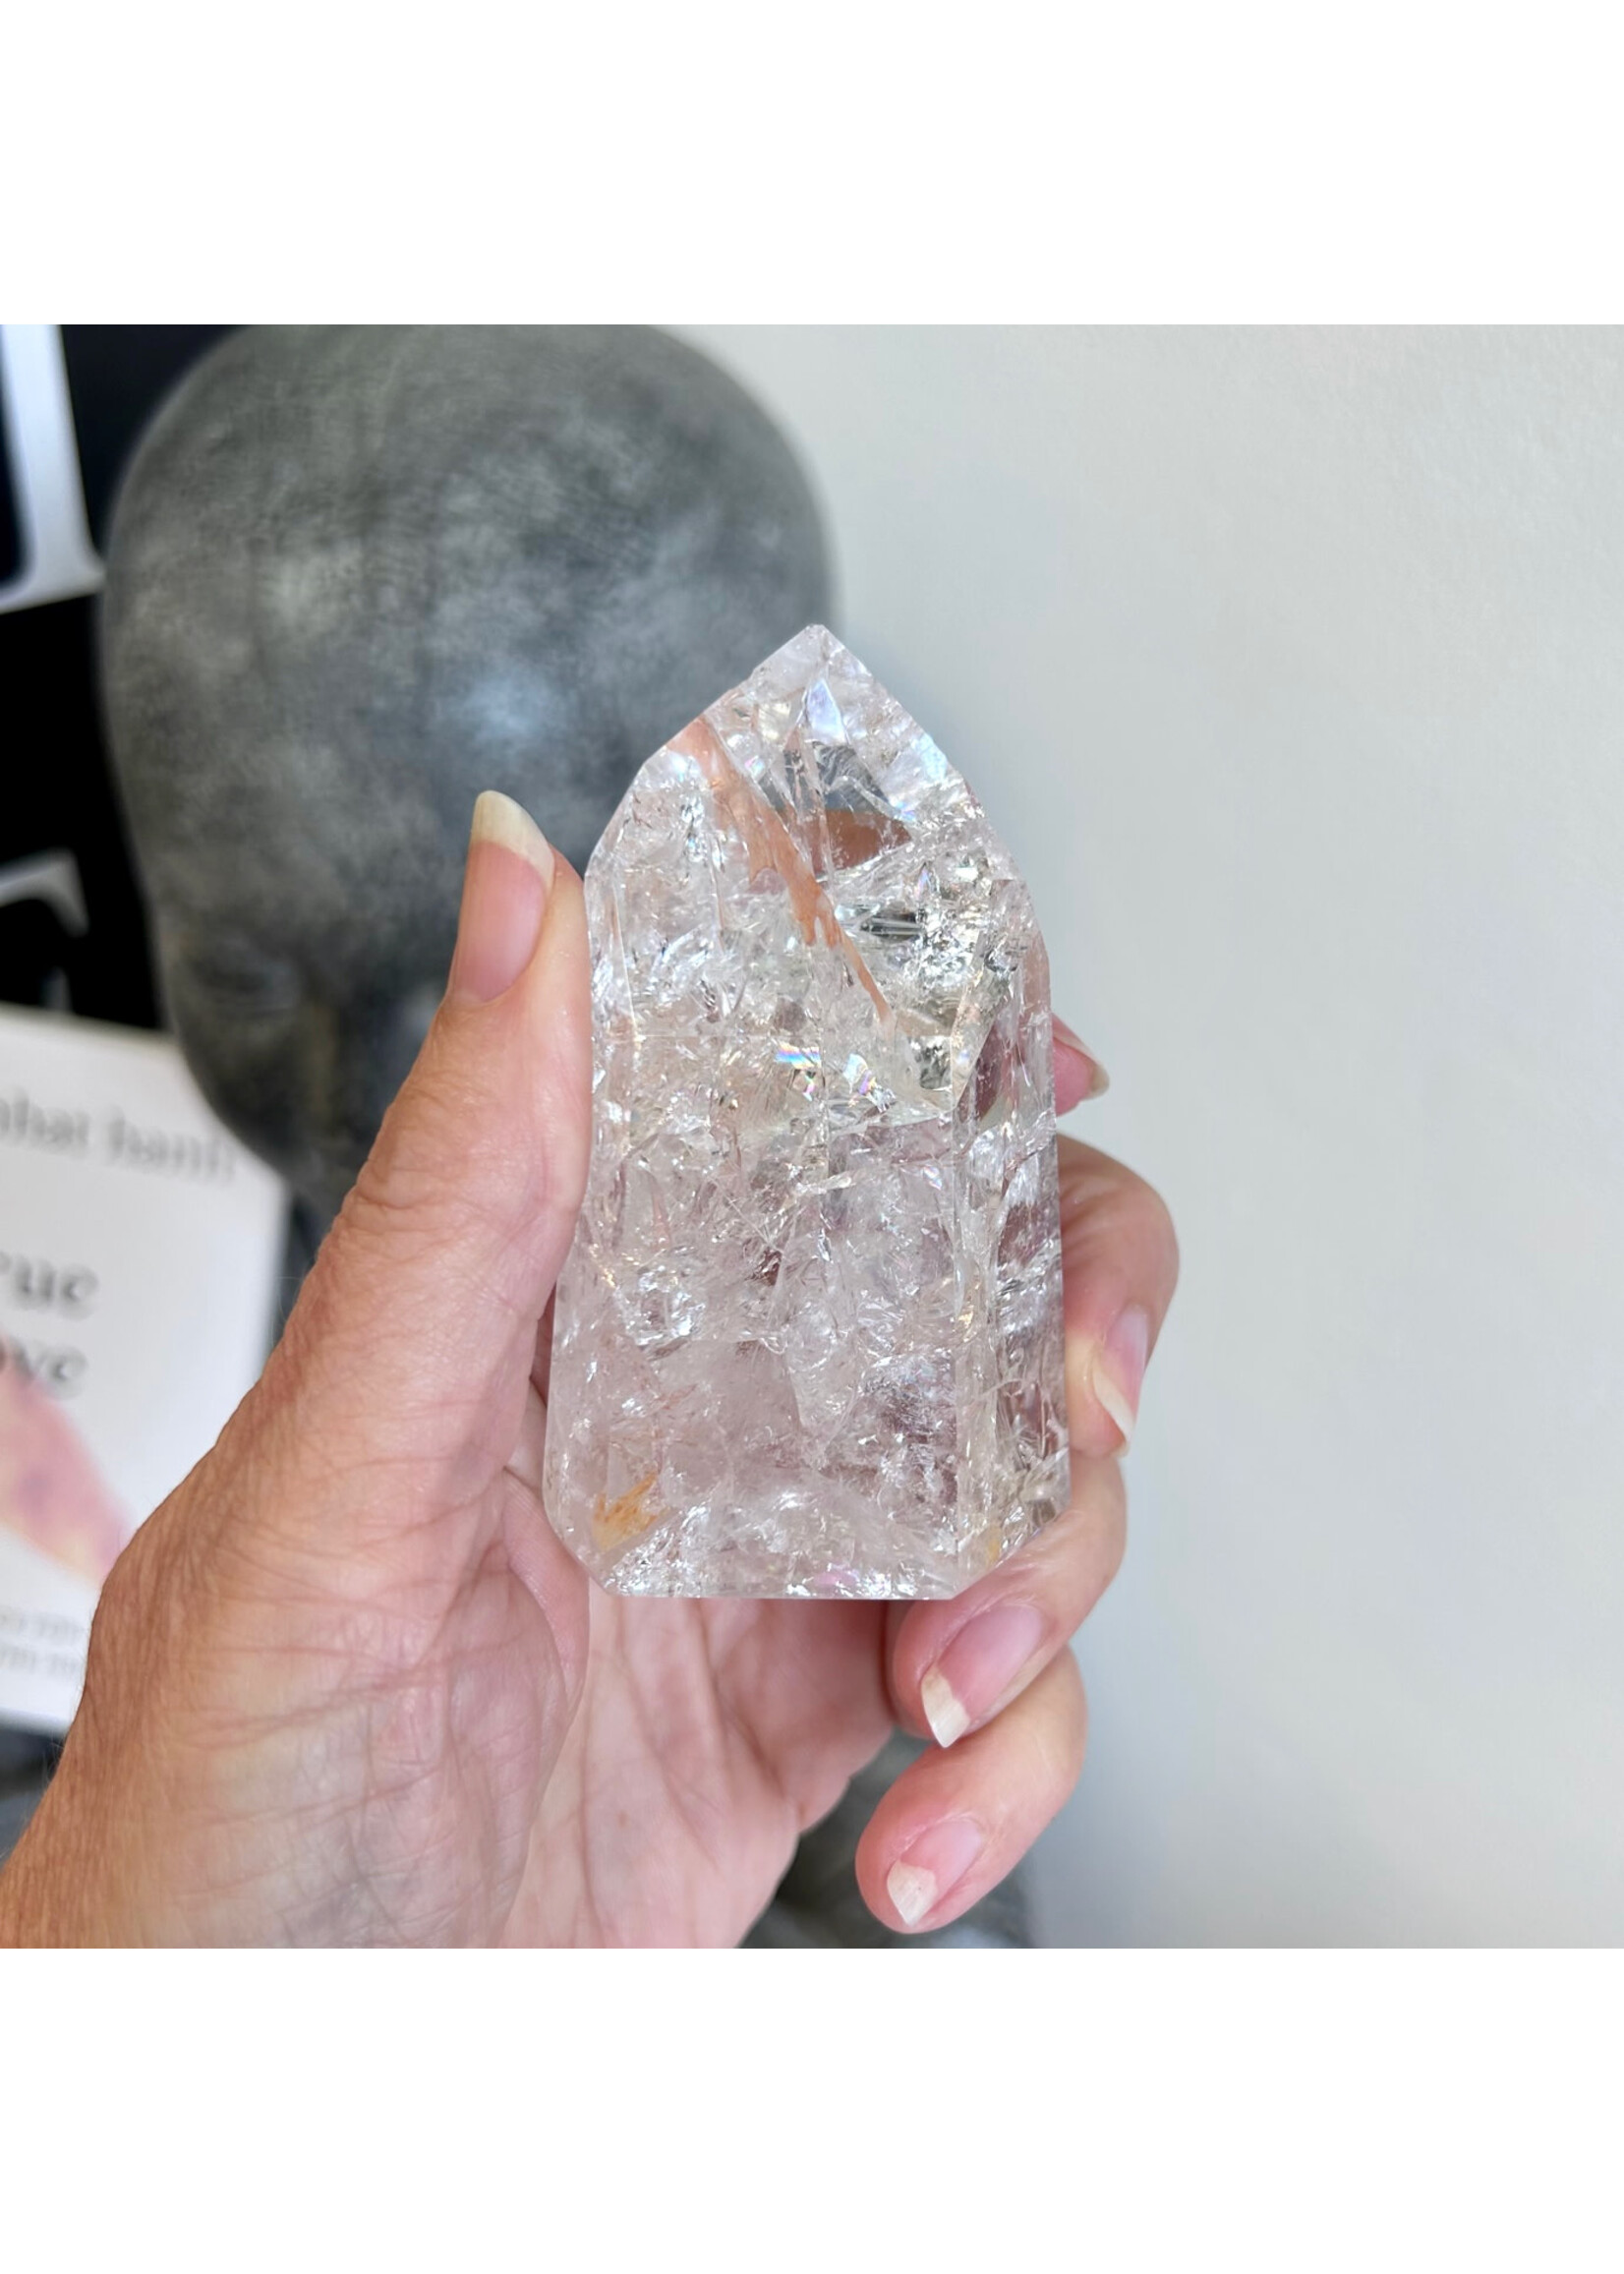 Fire and Ice Quartz Generators for firing up your energy